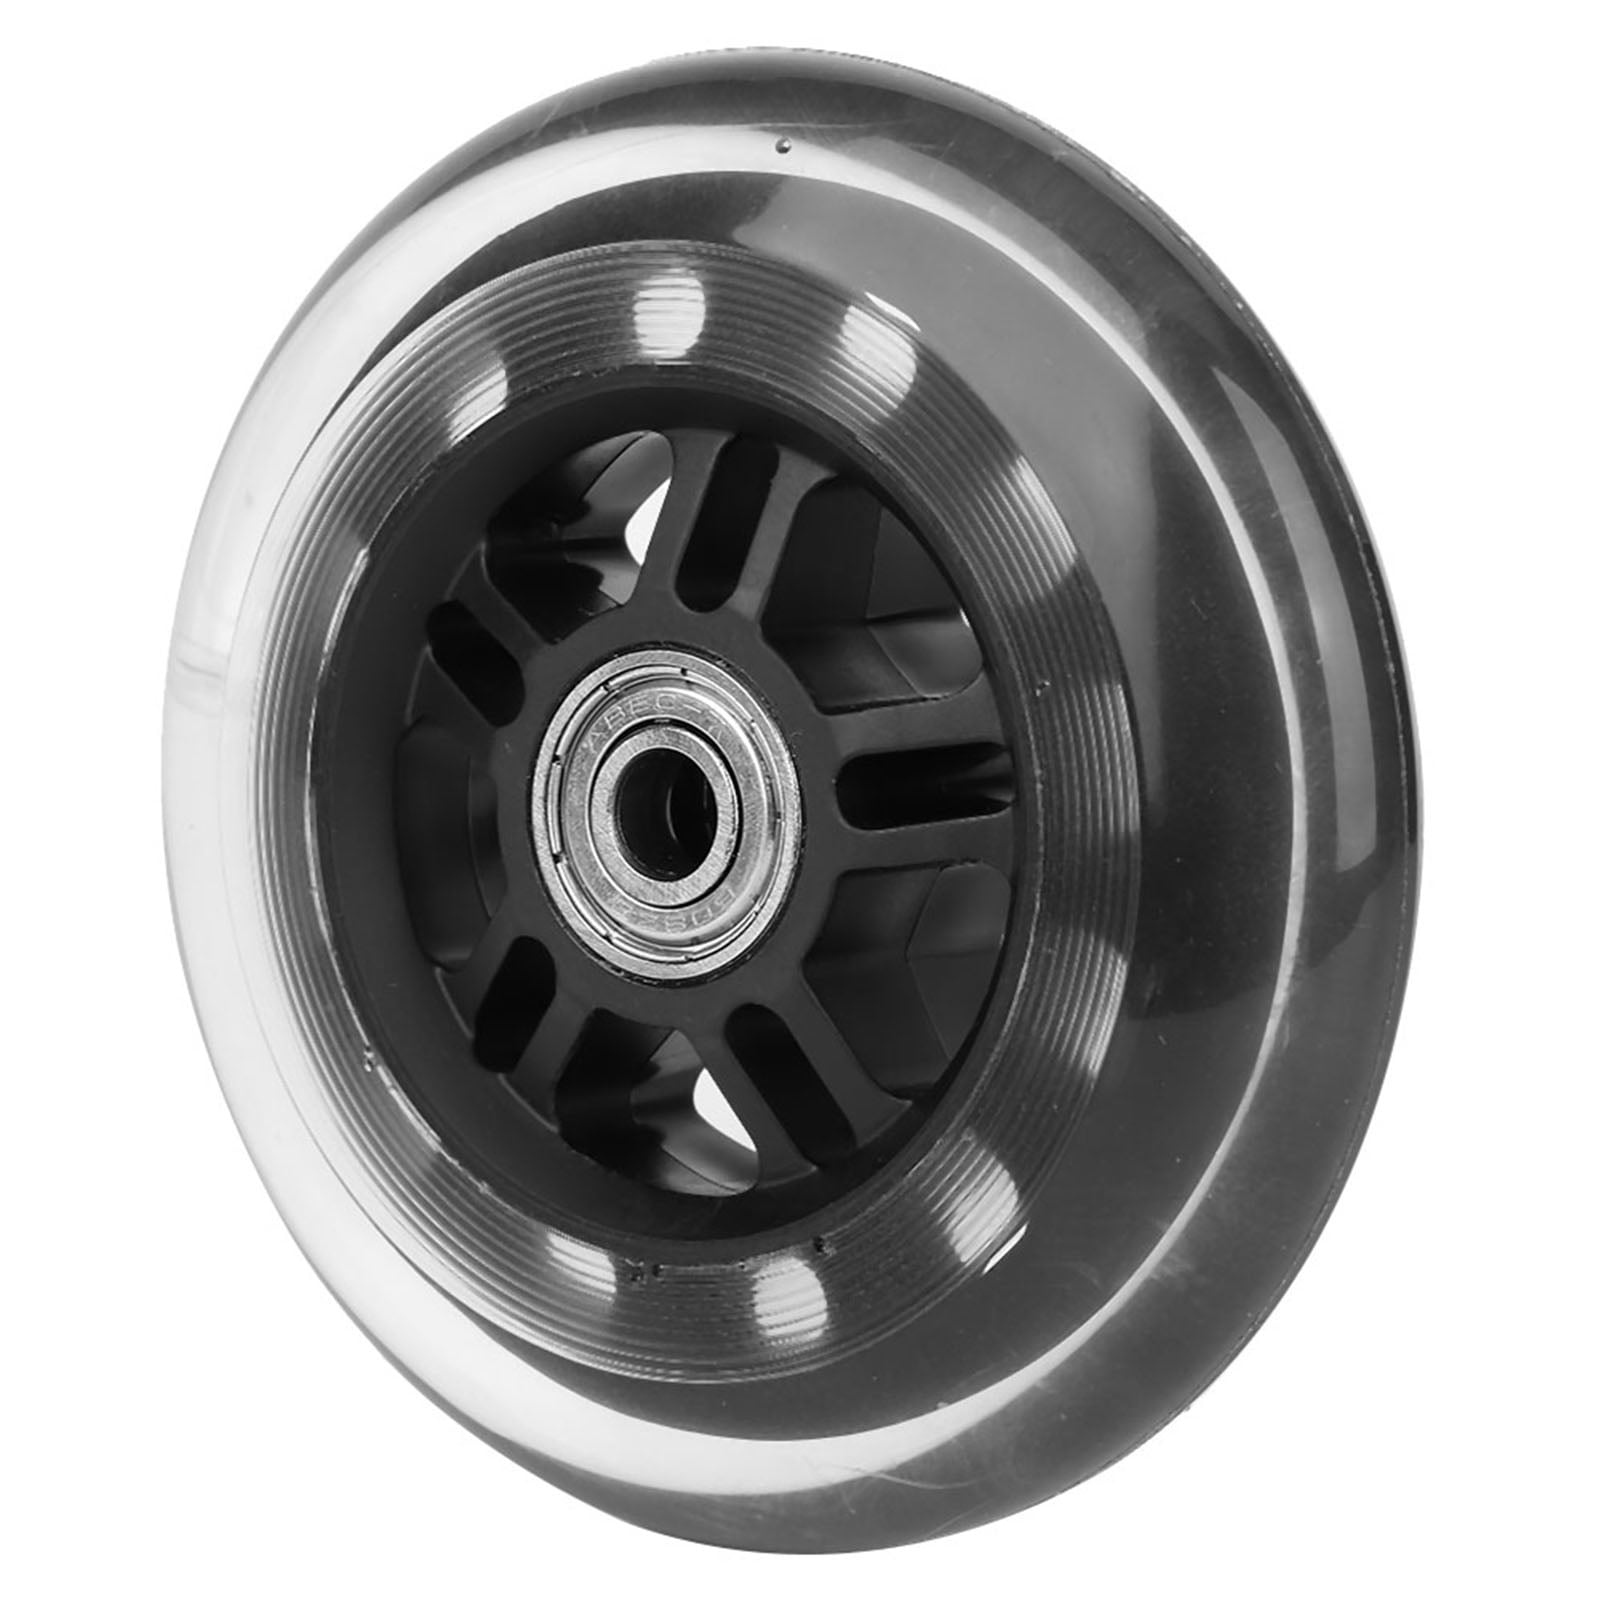 608ZZ Bearing Caster Wheels 4 inches PU Casters For Small Carts/Doors HOT 